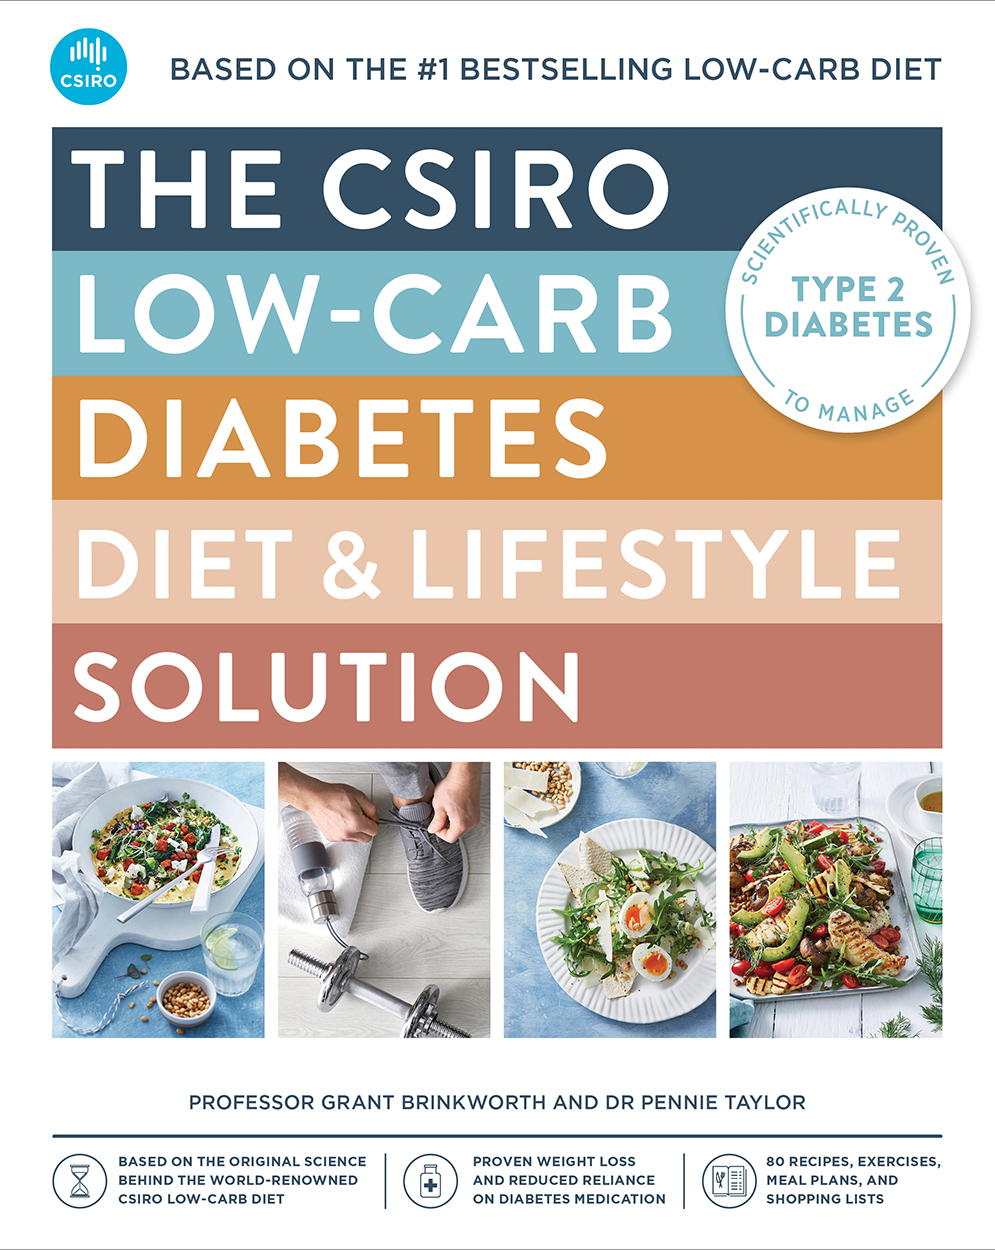 Cover of The CSIRO Low-Carb Diabetes Diet & Lifestyle Solution featuring bold title font and pictures of food and exercise.